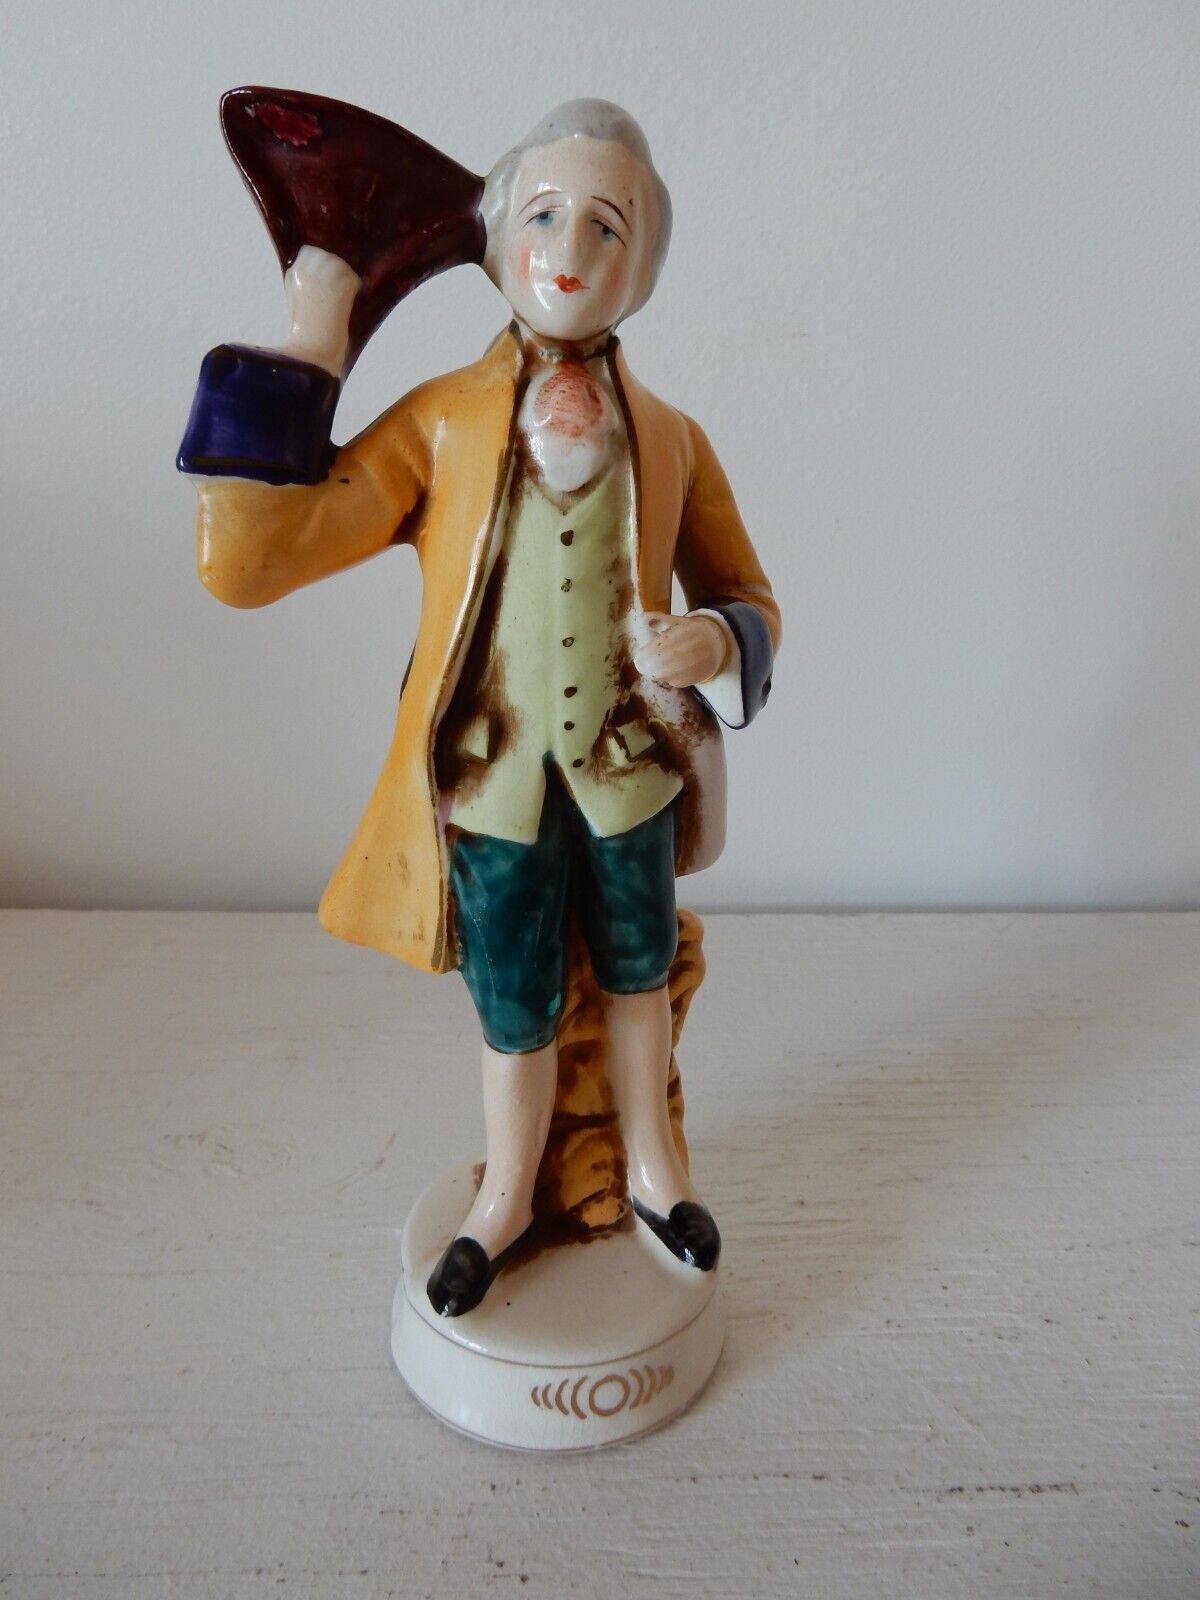 Vintage Historical Figurine that Looks Like Thomas Jefferson - Priority Shipping